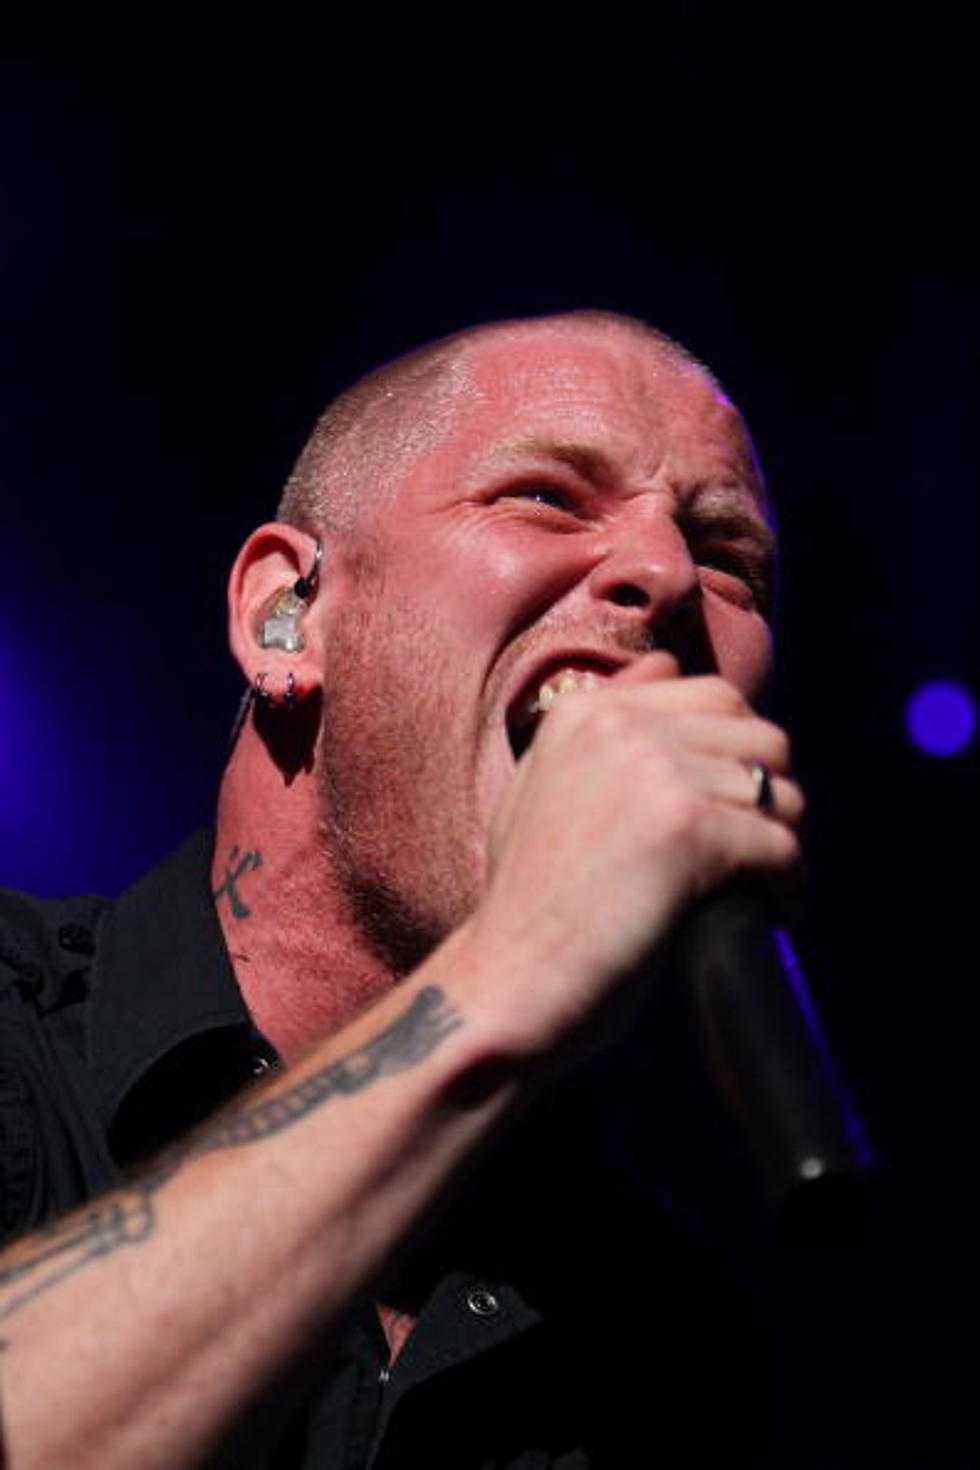 COREY TAYLOR Says He Is Writing New Music With DUFF MCKAGAN